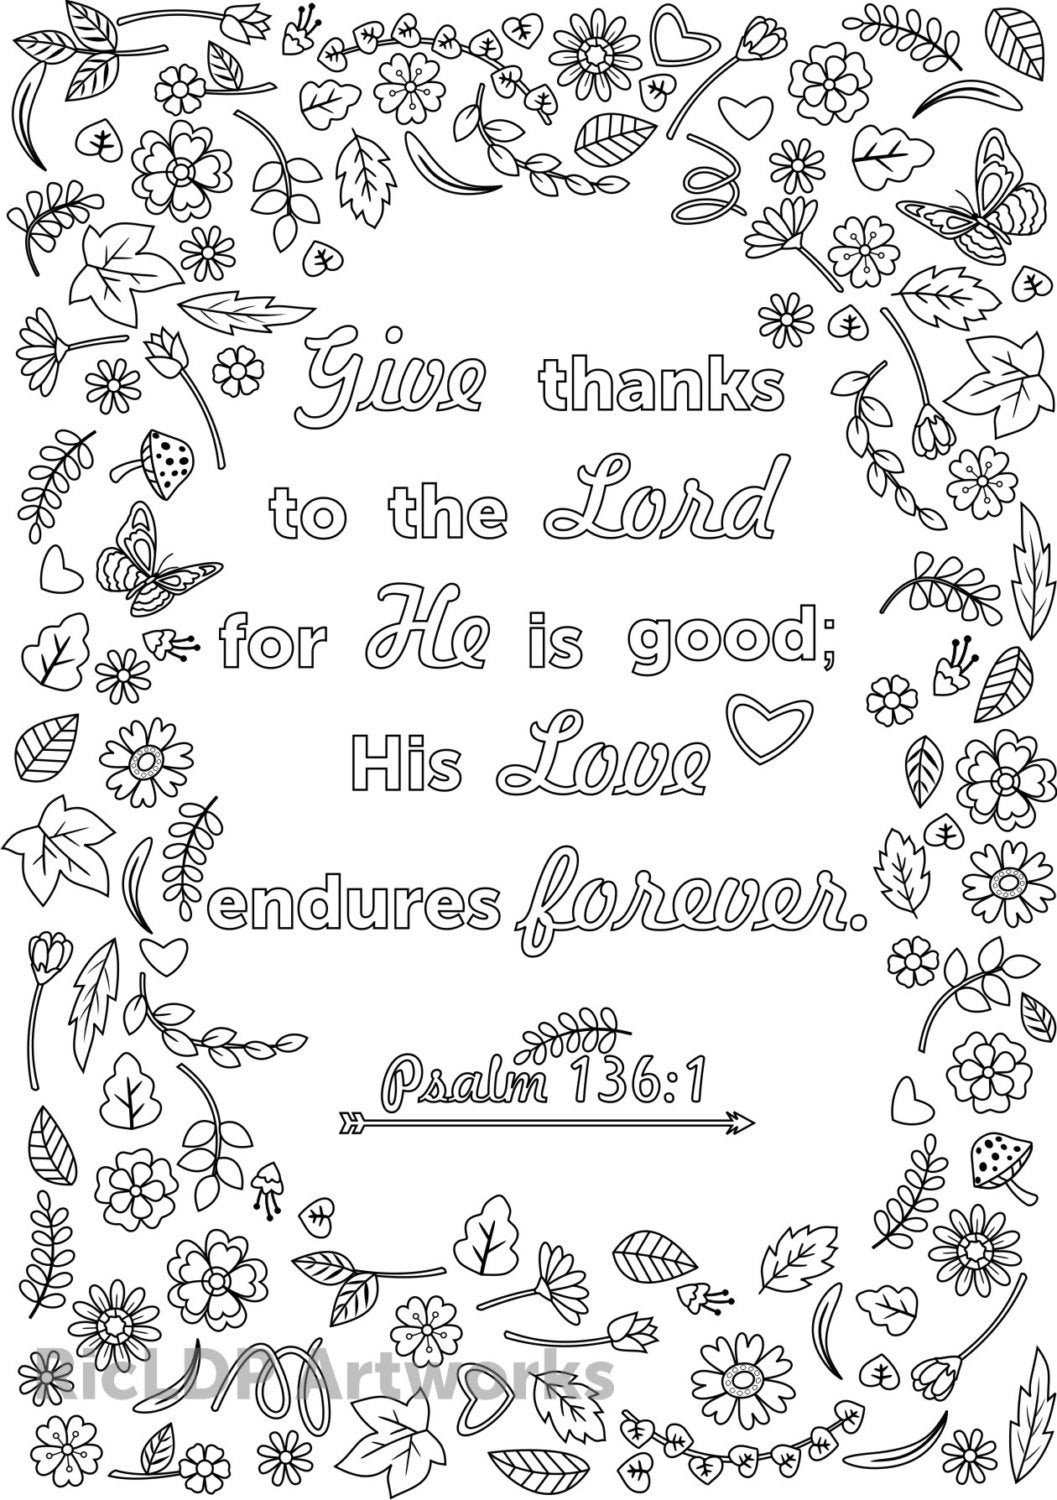 Printable Bible Coloring Pages With Verses
 Three Bible Verse Coloring Pages for Adults Printable